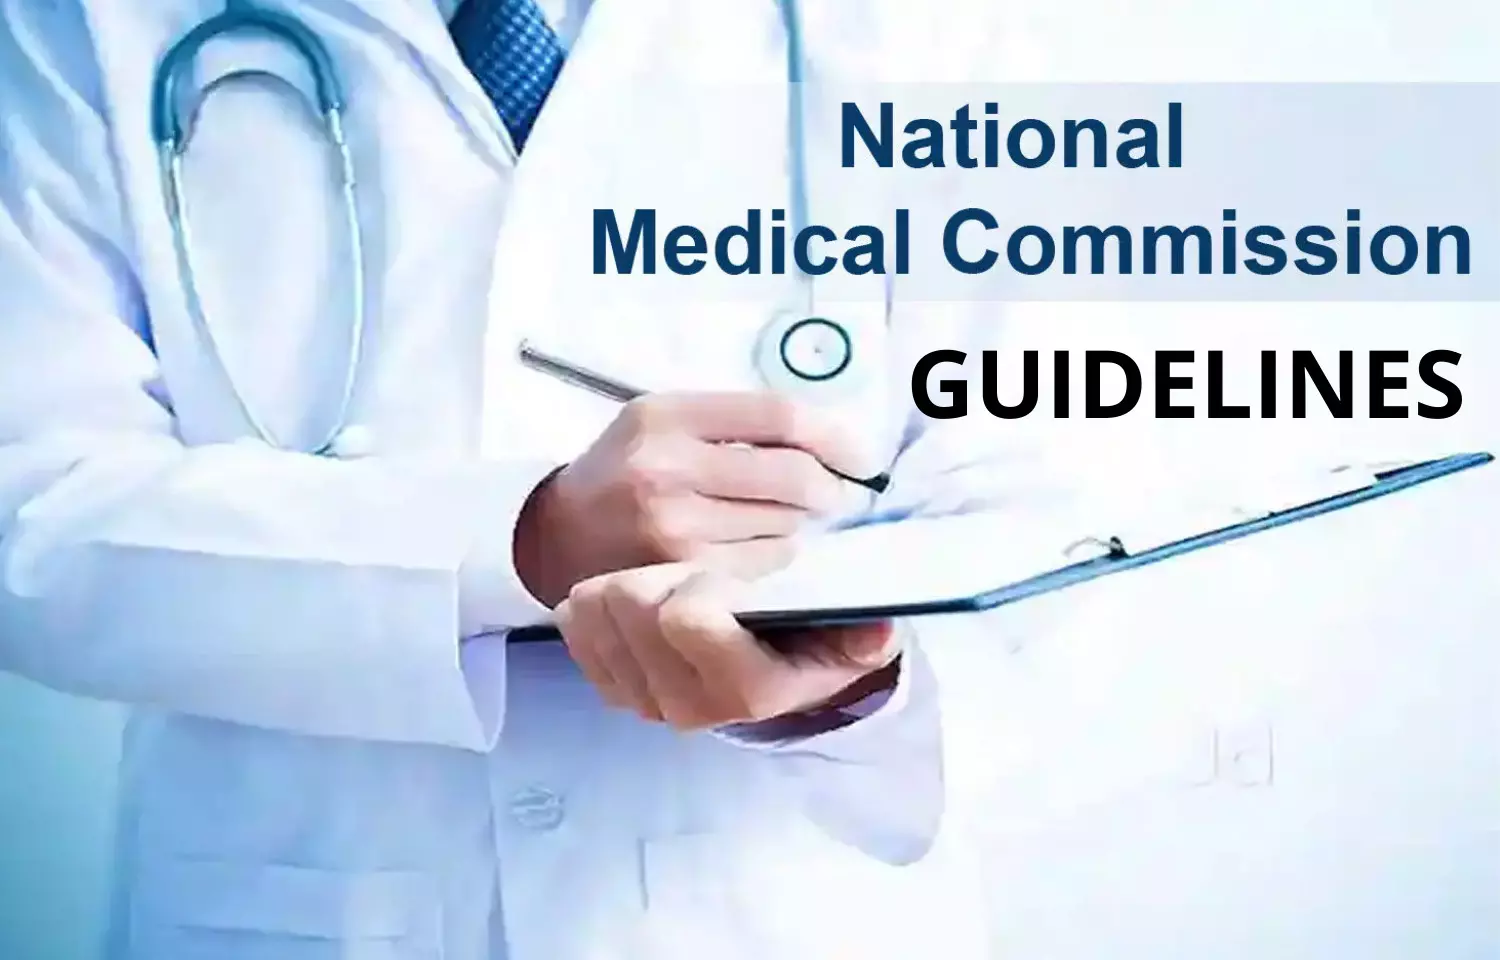 Should and Must: NMC proposes New Code of Medical Ethics in draft guidelines, Details